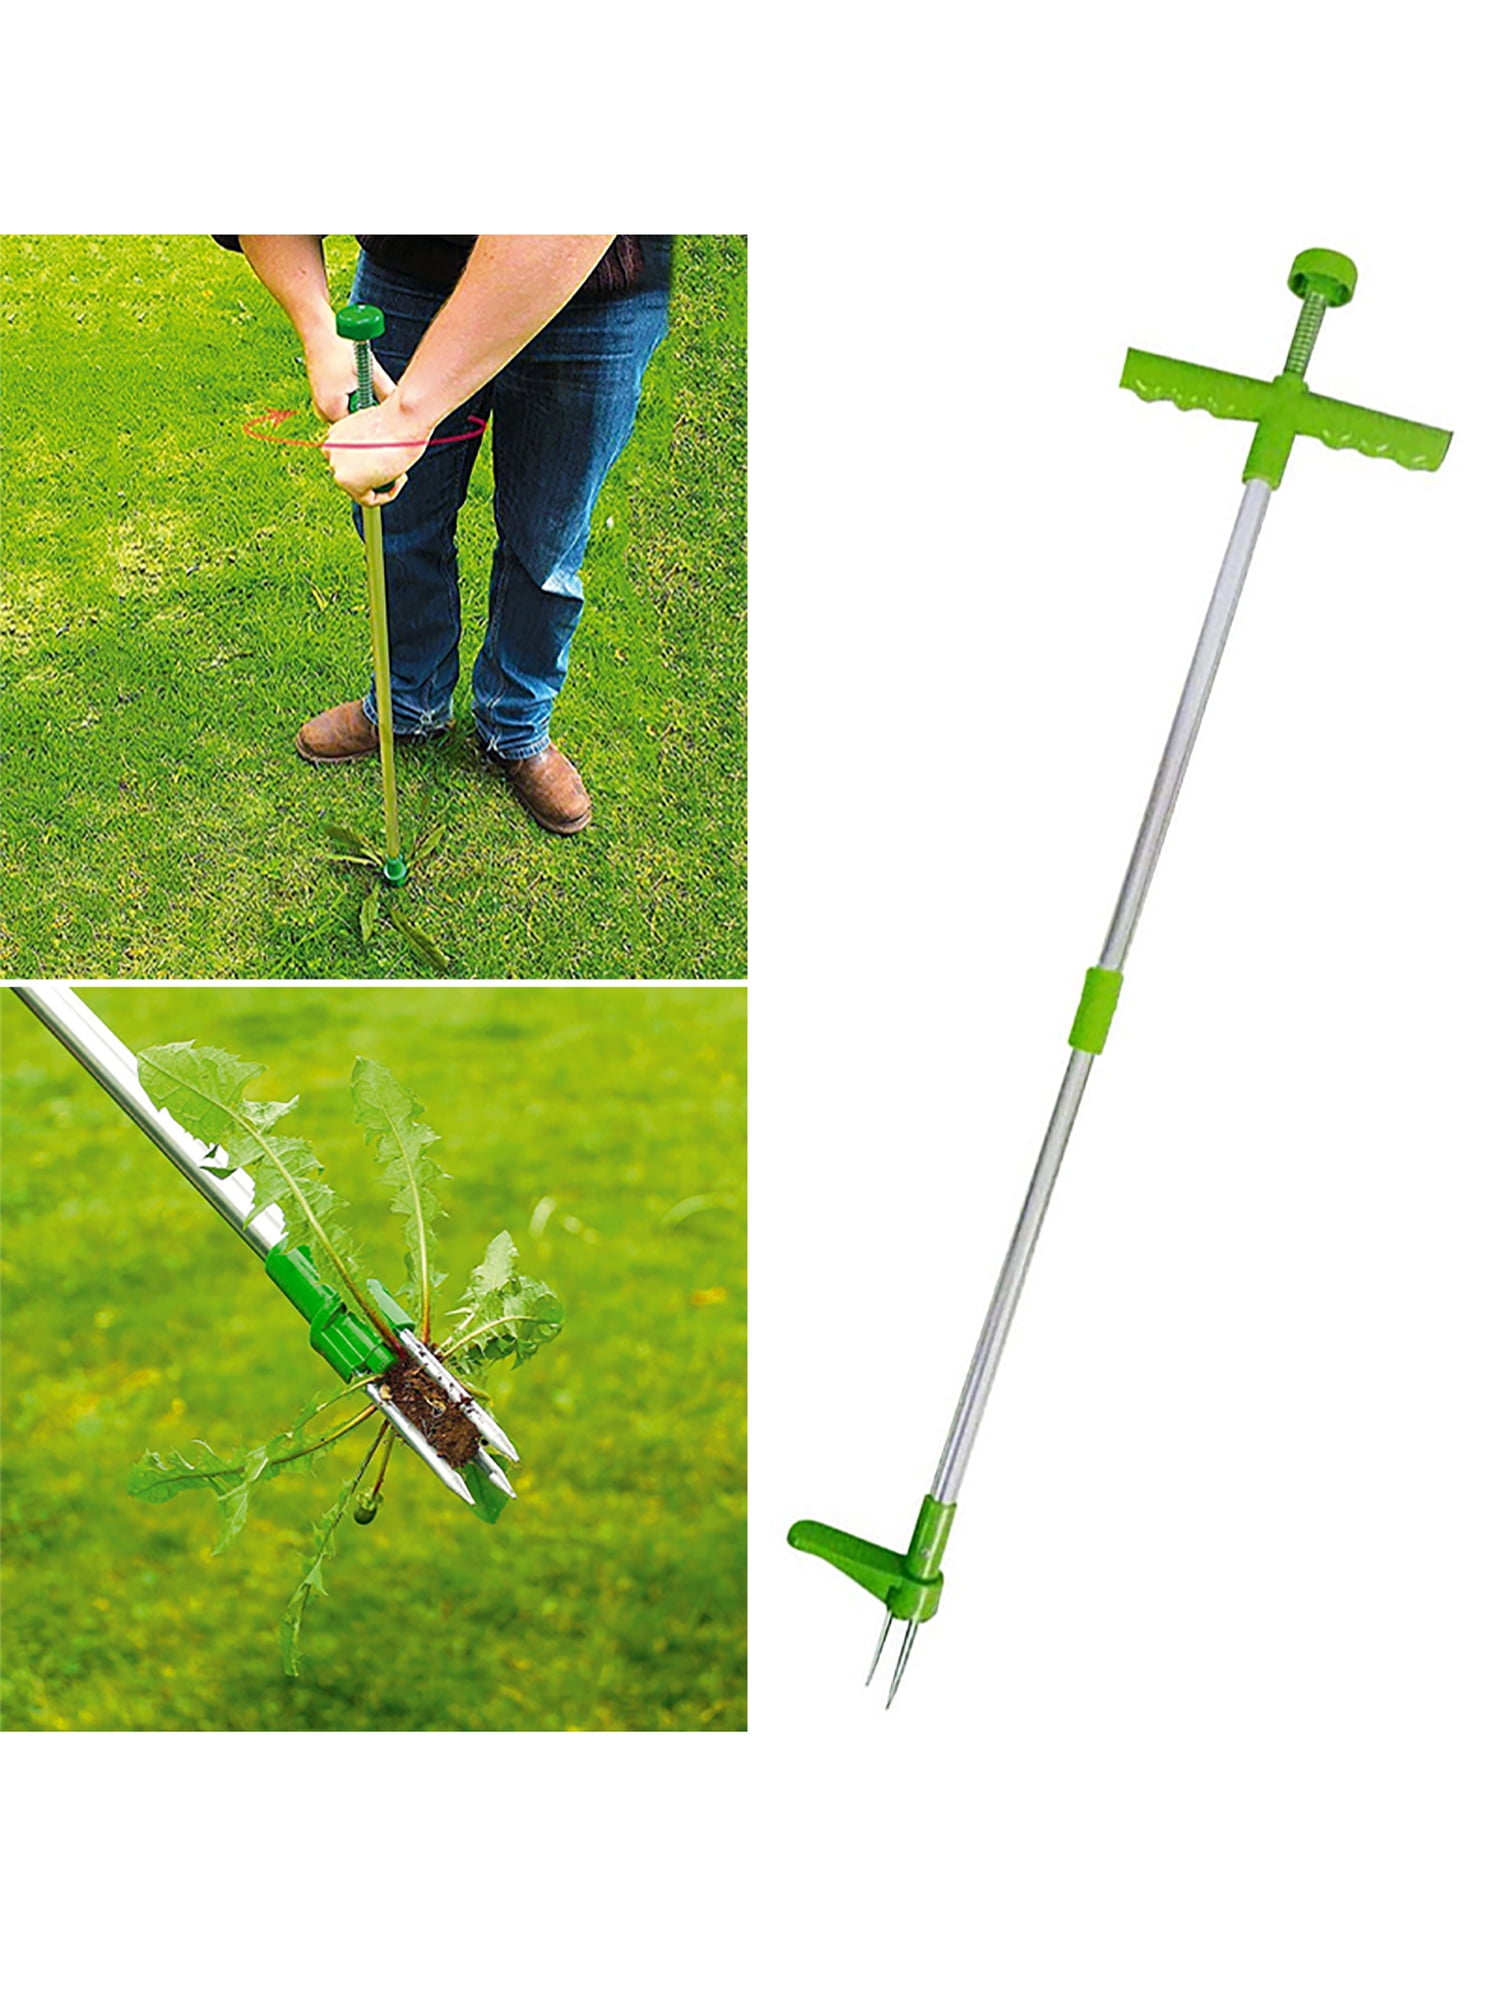 Weed Puller Weeder Twister Twist Pull Garden Lawn Root Remover Tool free ship 